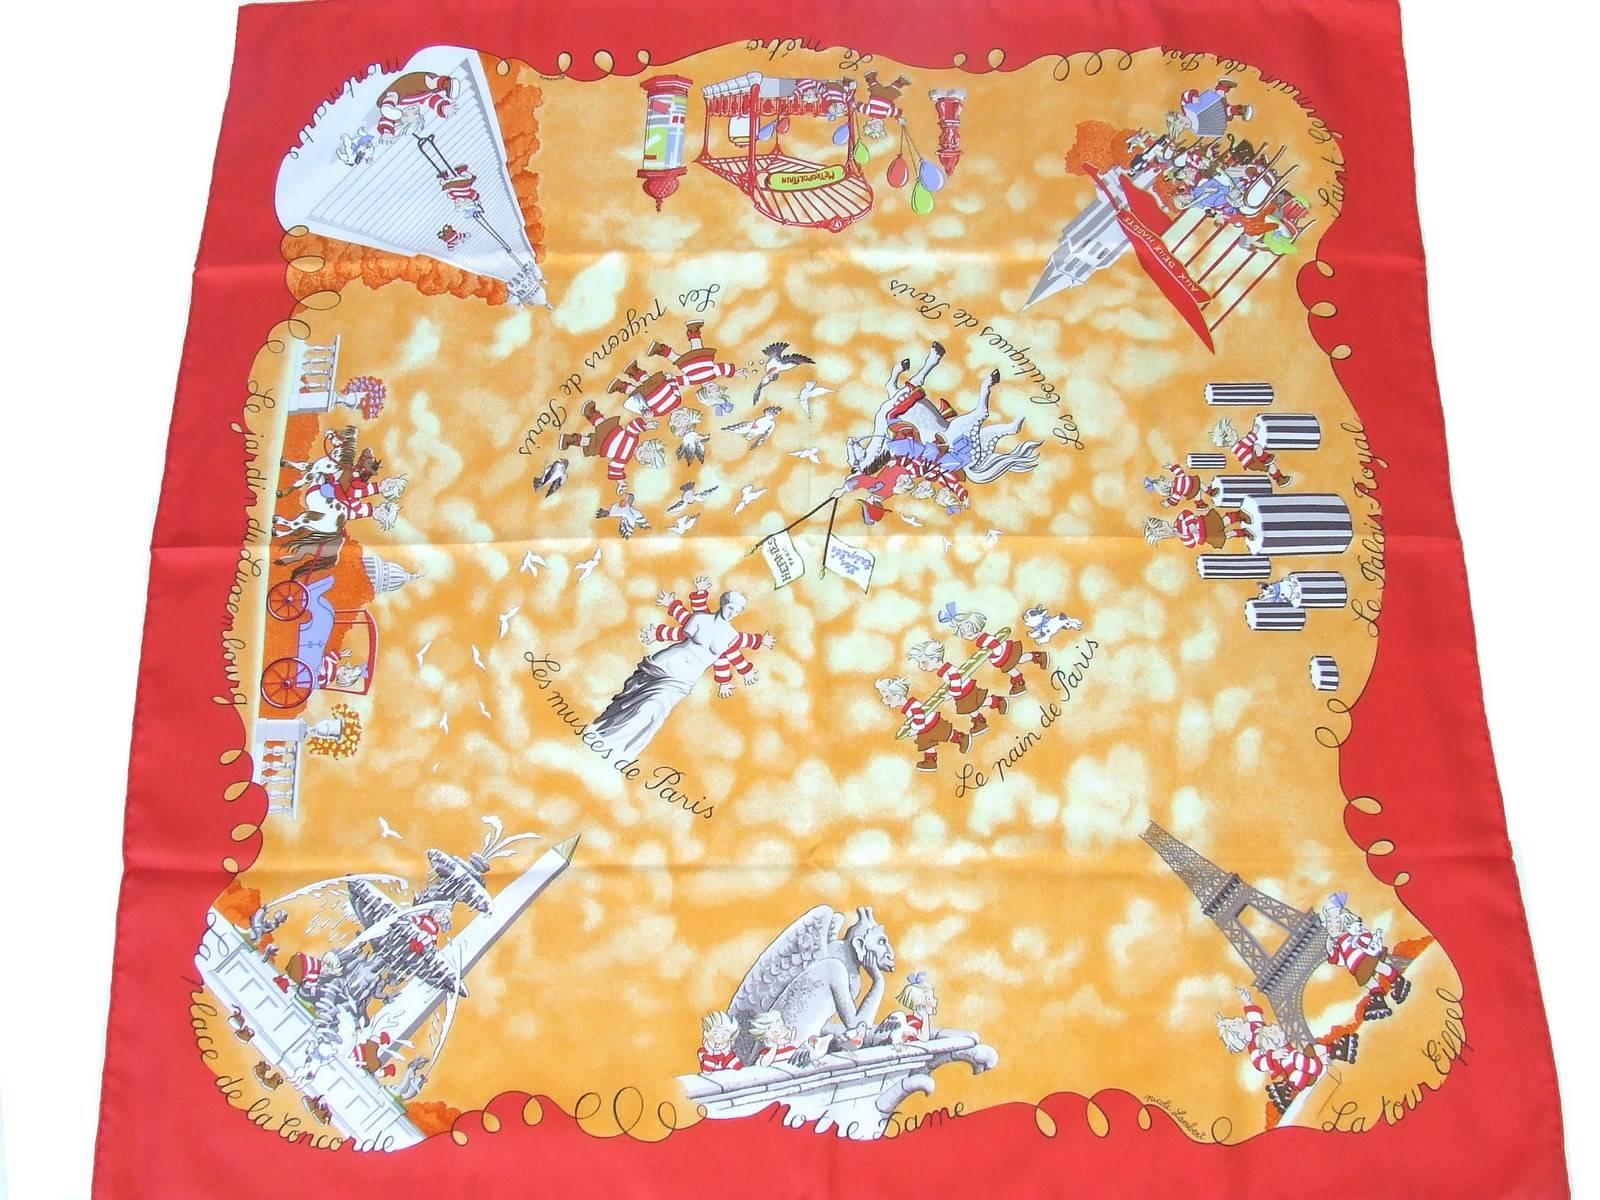 Cutest Authentic Hermes Scarf Ever !

Pattern: 